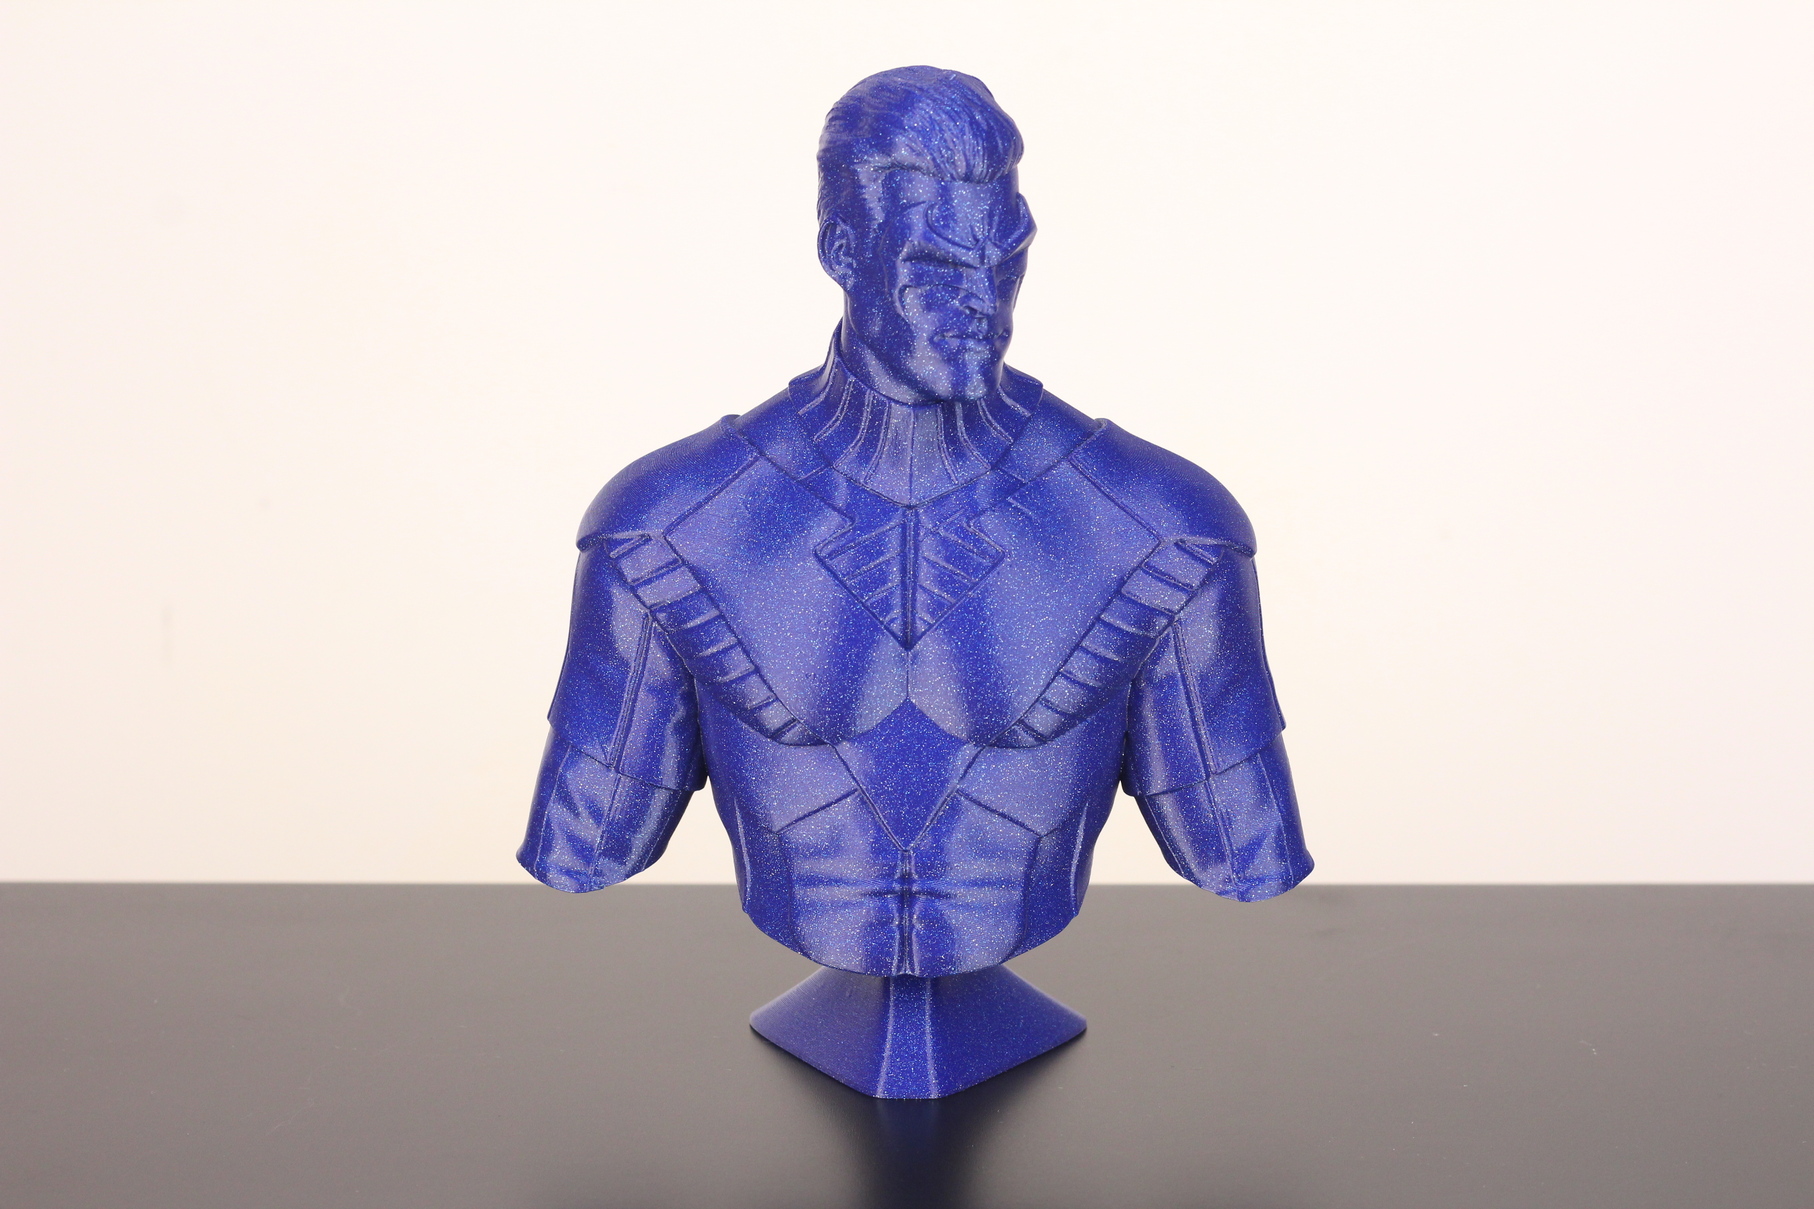 Nightwing Bust BIQU B1 SE Plus test print 1 | BIQU B1 SE PLUS Review: SKR 2 and ABL from Factory